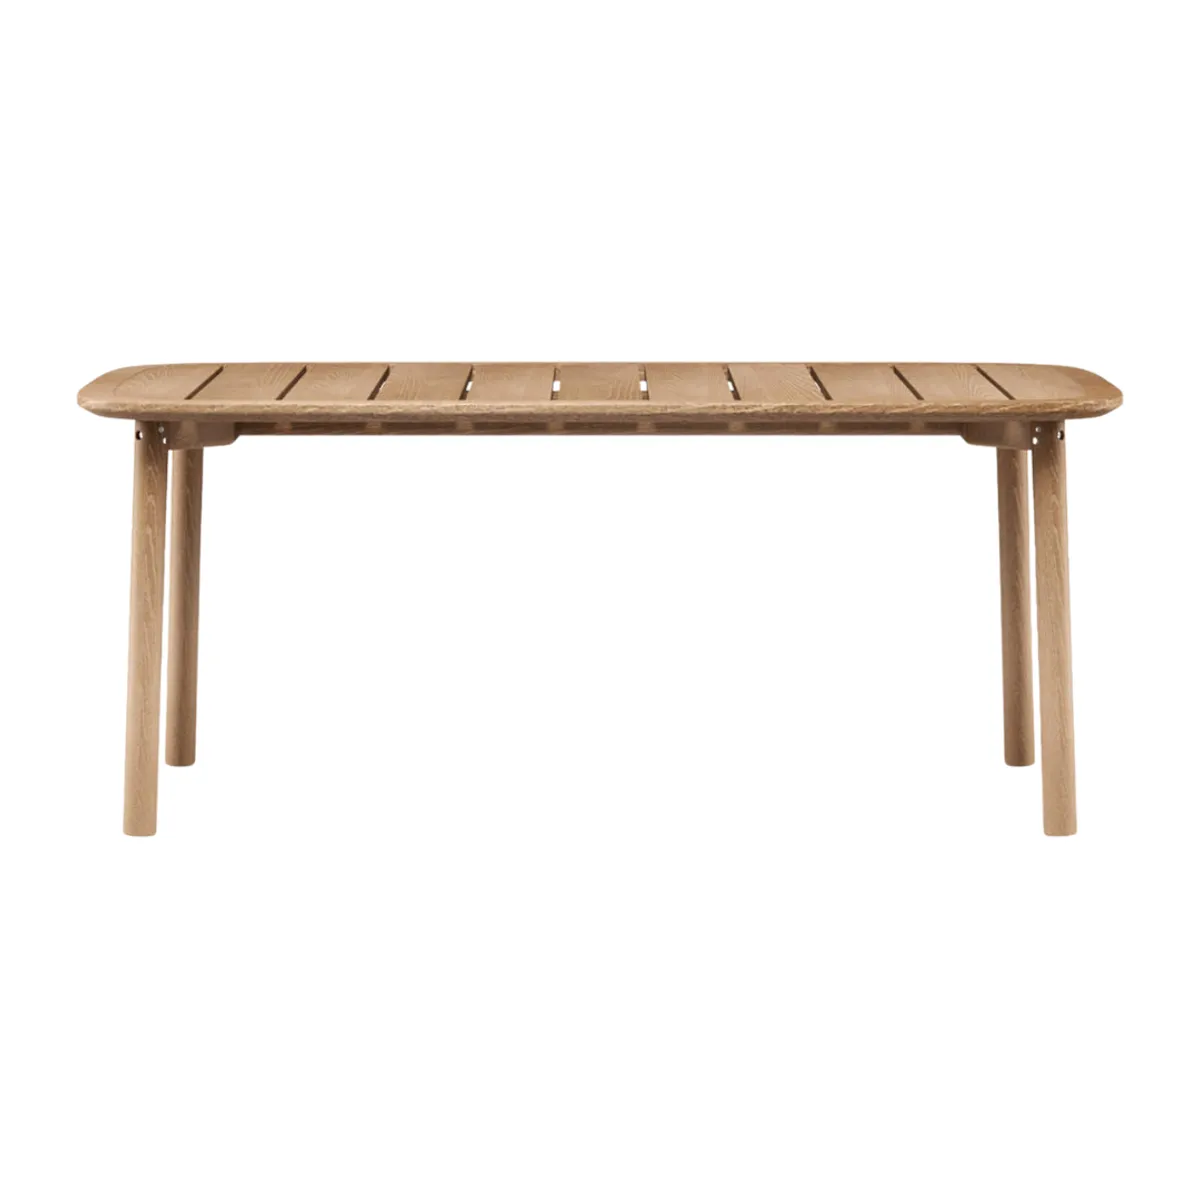 Meira dining table 2